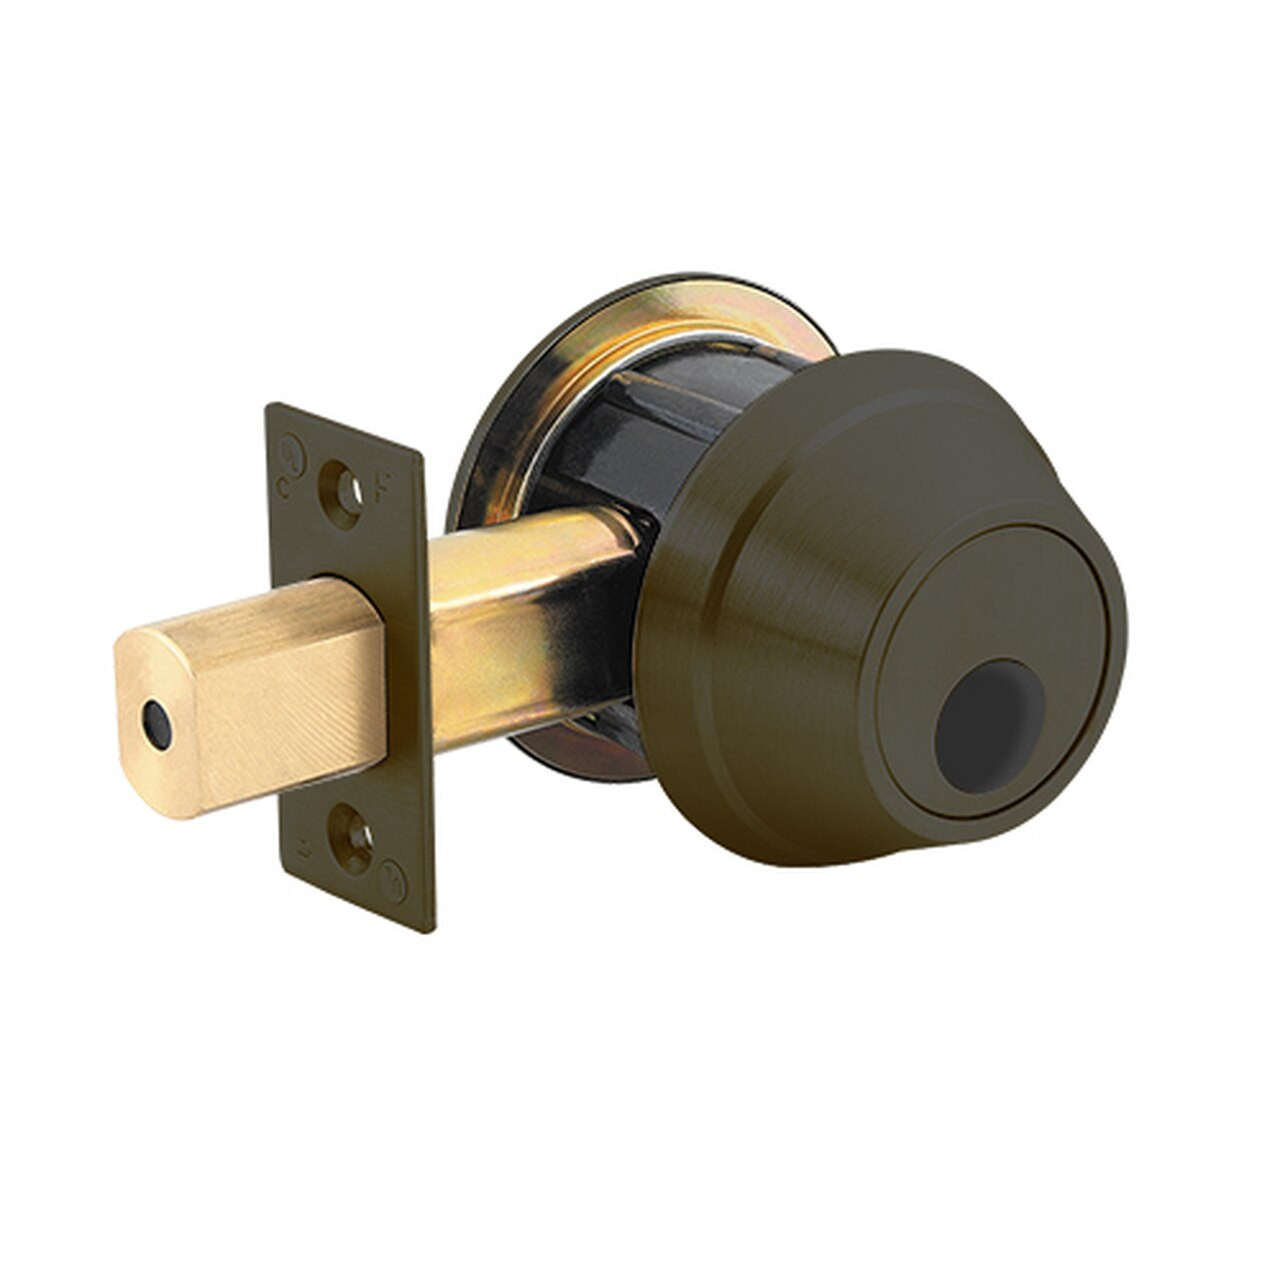 QDB282-613-S8-NOS-SC Stanley QDB200 Series Double Cylinder Standard Duty Auxiliary Deadbolt Lock in Oil Rubbed Bronze Finish